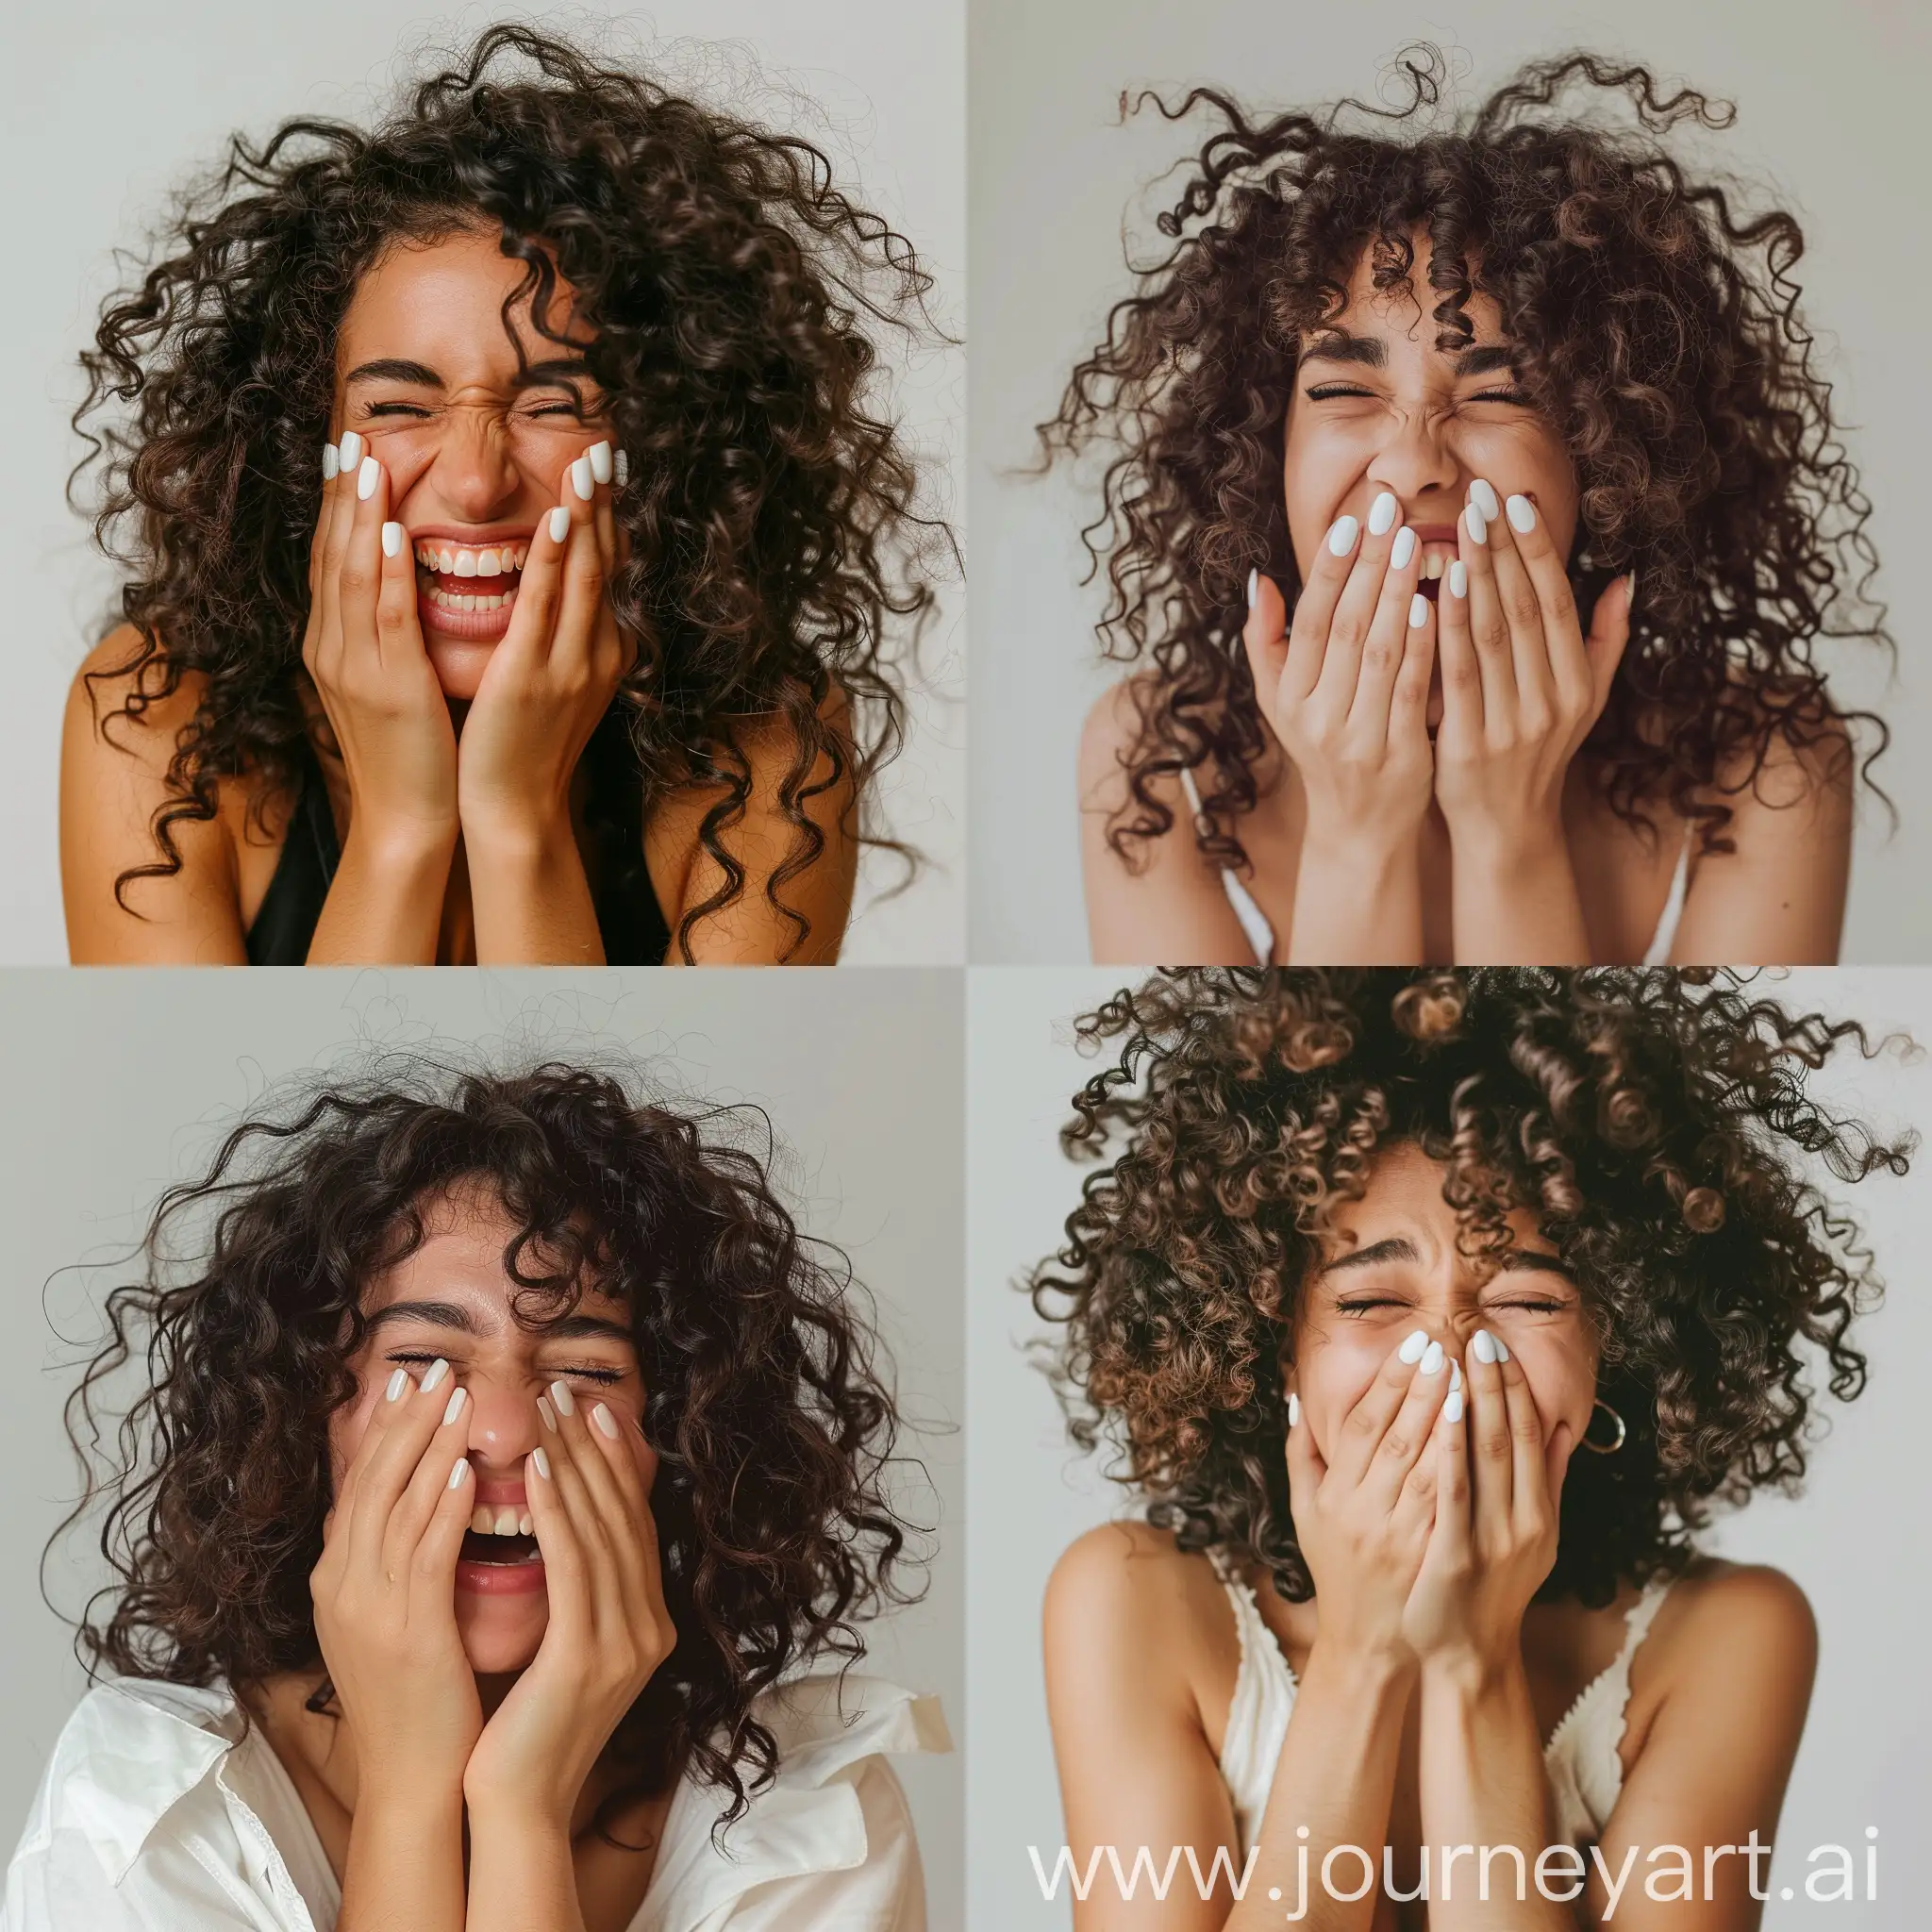 Joyful-Woman-with-Curly-Hair-Laughing-and-Covering-Mouth-White-Gel-Nail-Polish